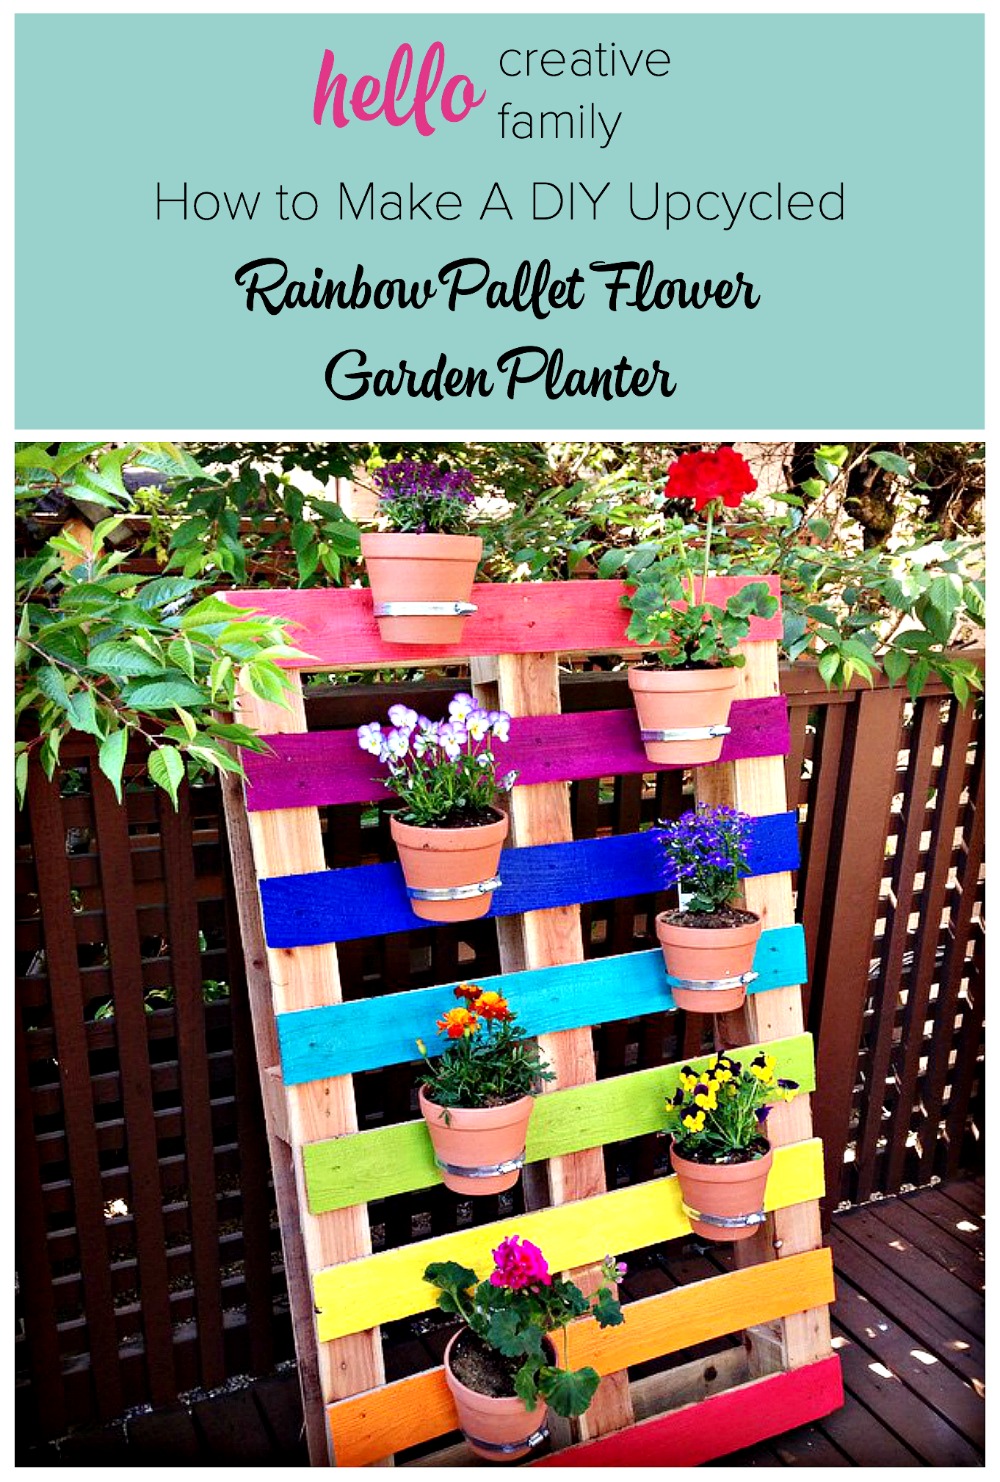 27 Rainbow Crafts, DIY Projects and Recipes Your Family Will Love